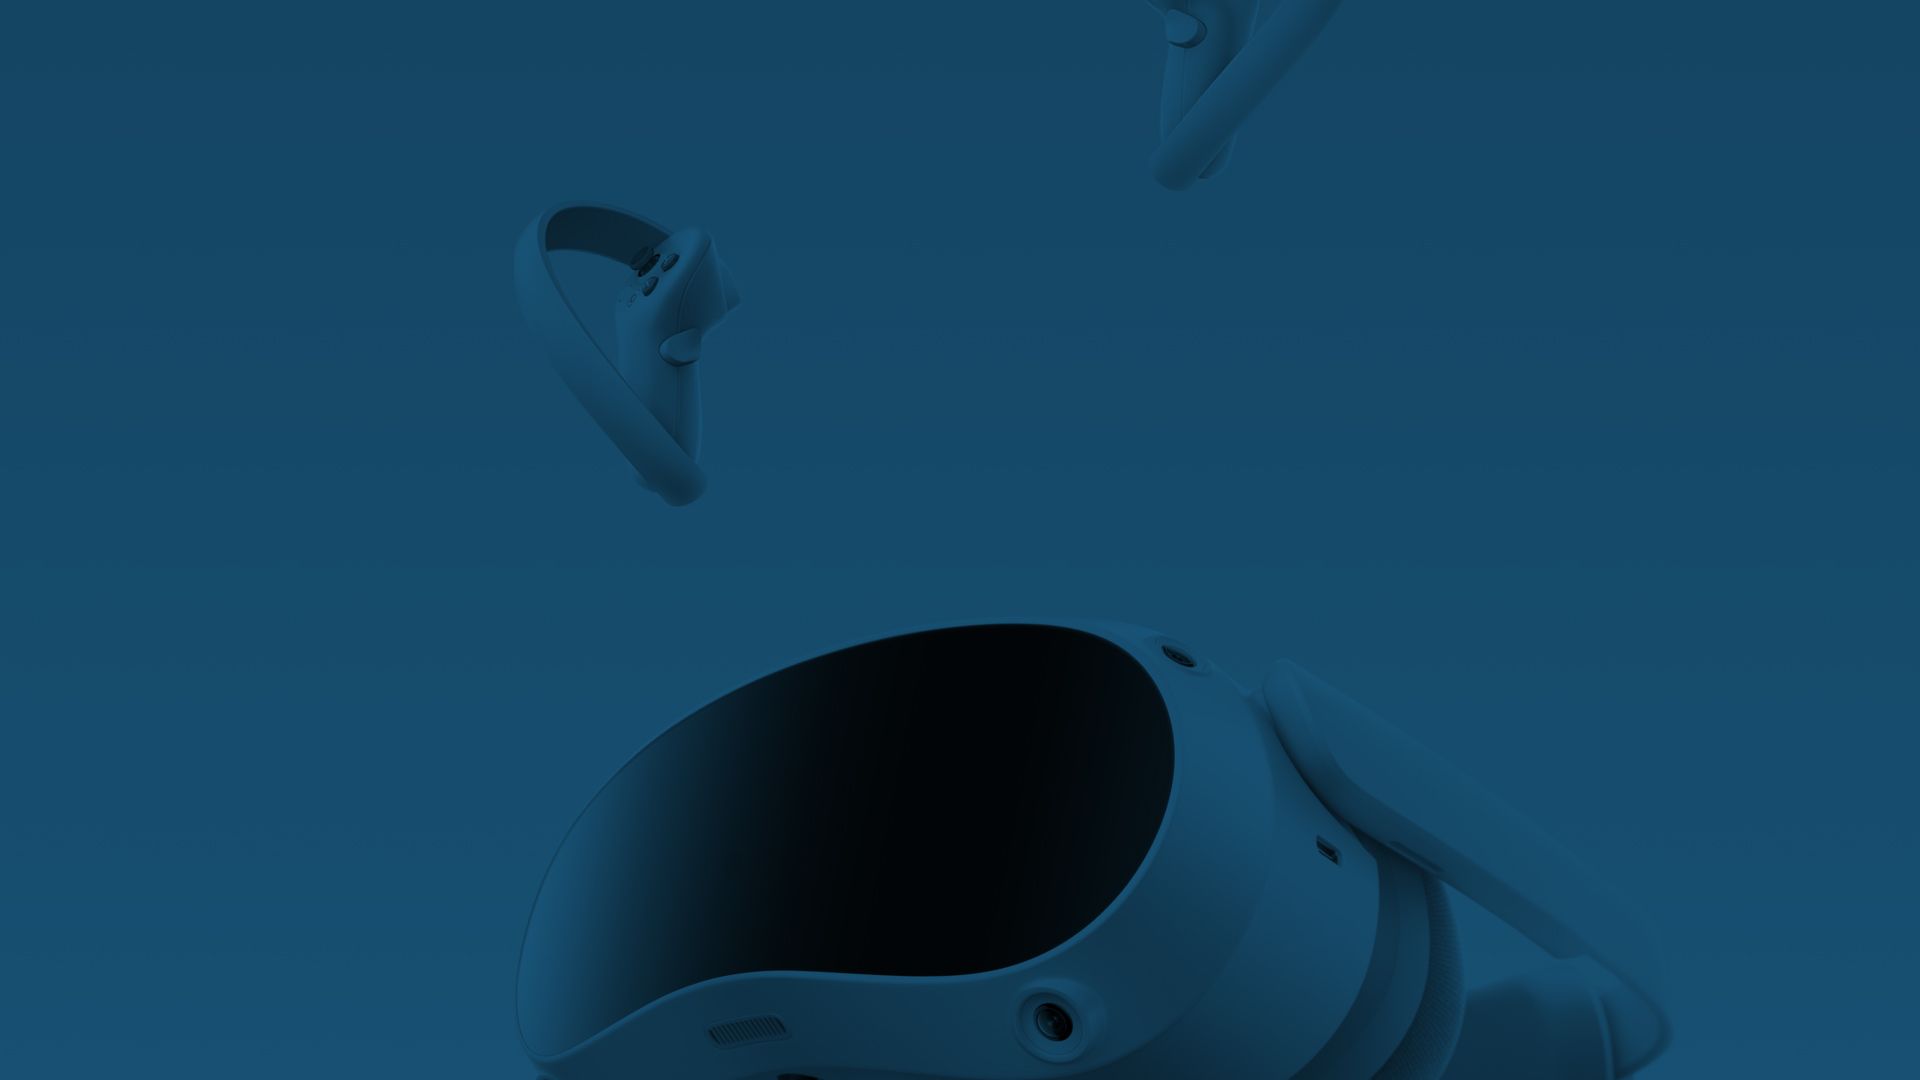 A header image: a Pico 4 VR headset and controllers with a blue overlay.